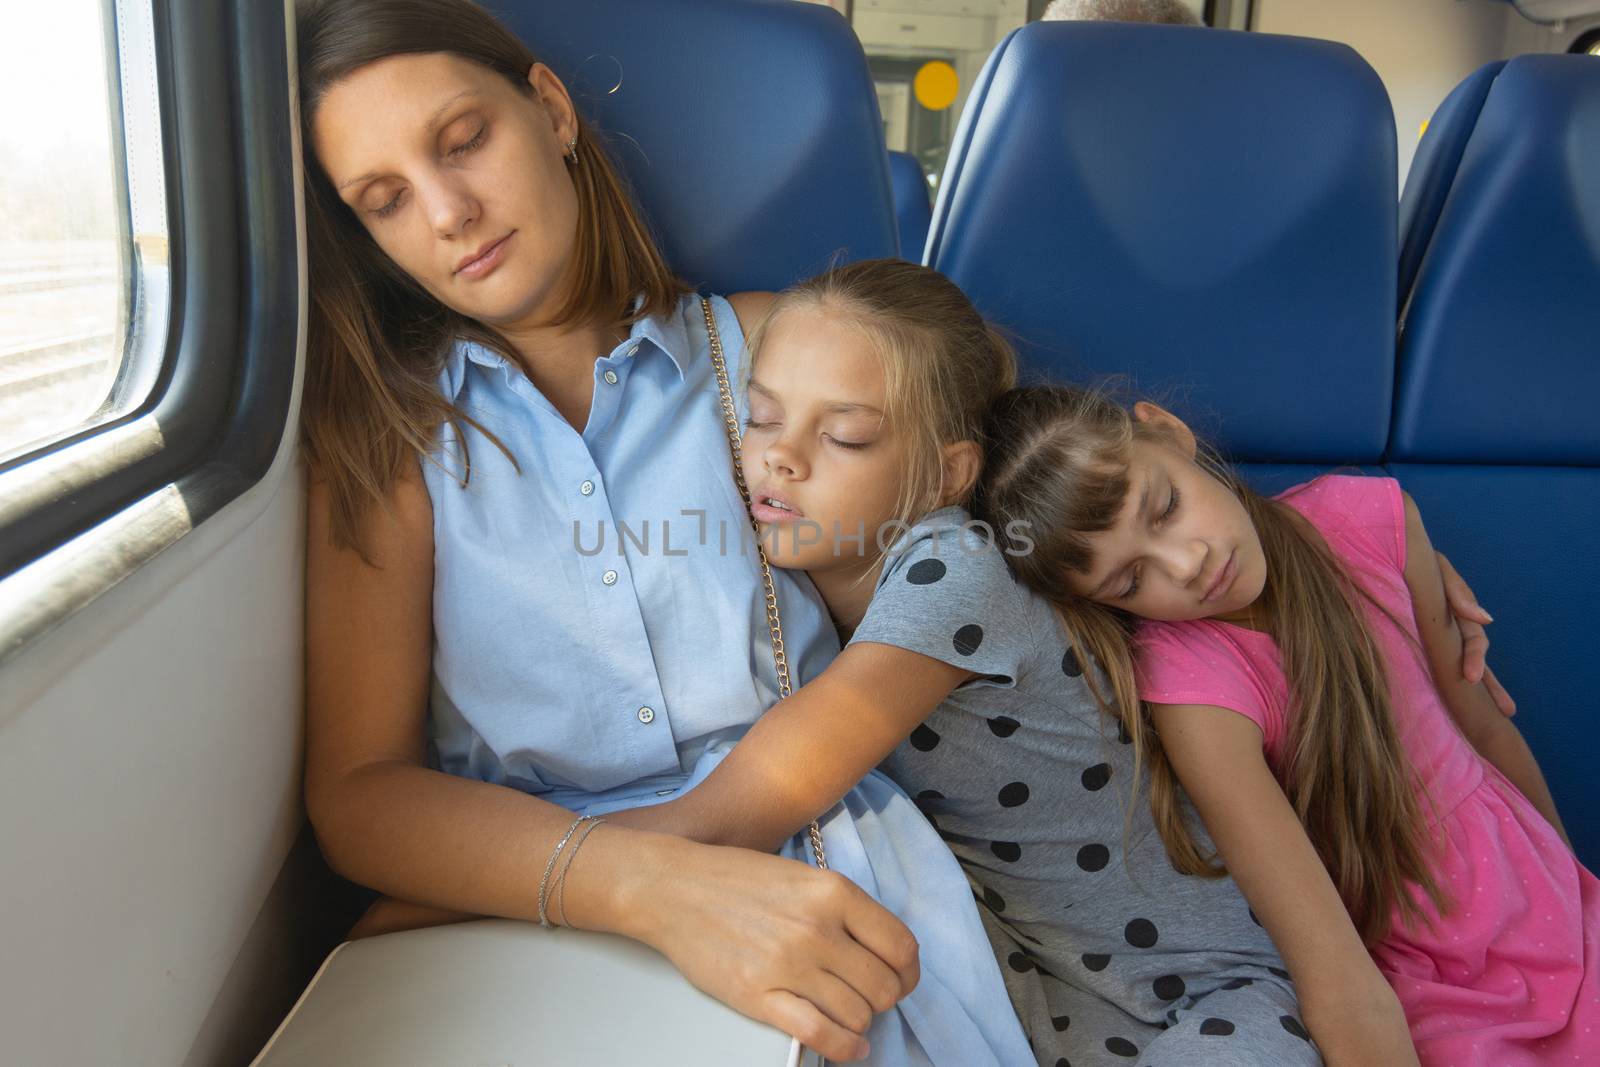 Mom and two daughters fell asleep in an electric train car by Madhourse